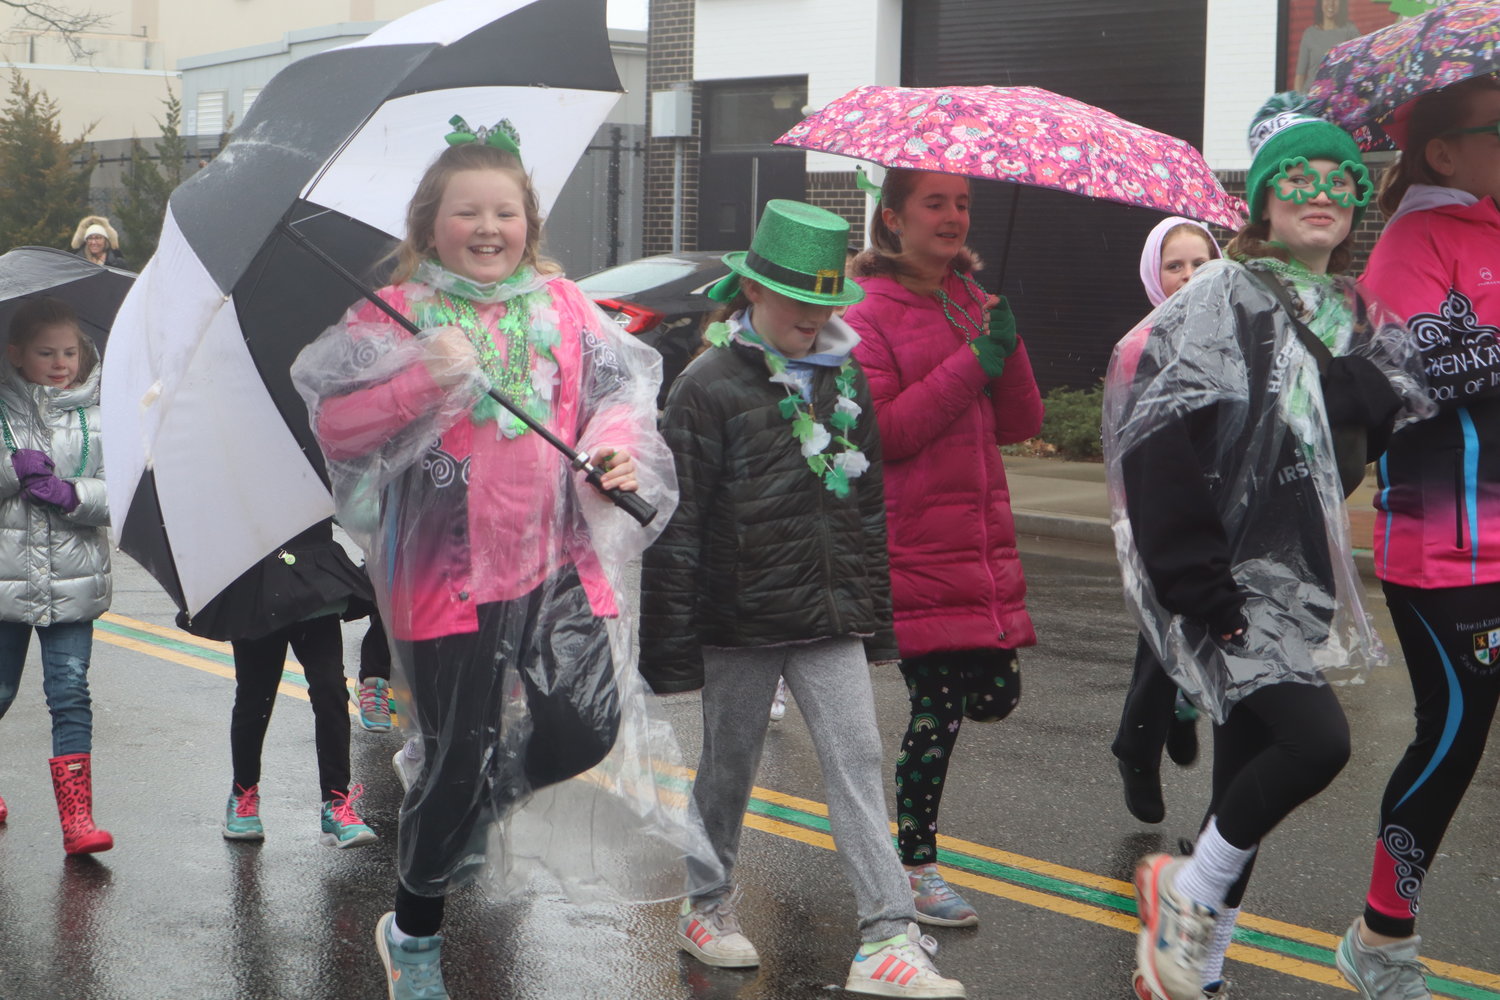 The weather couldn’t keep Michaela Stines down, as she joyfully performed with the Hagen-Kavanagh School of Irish Dance during the 25th annual Rockville Centre St. Patrick’s Day Parade.